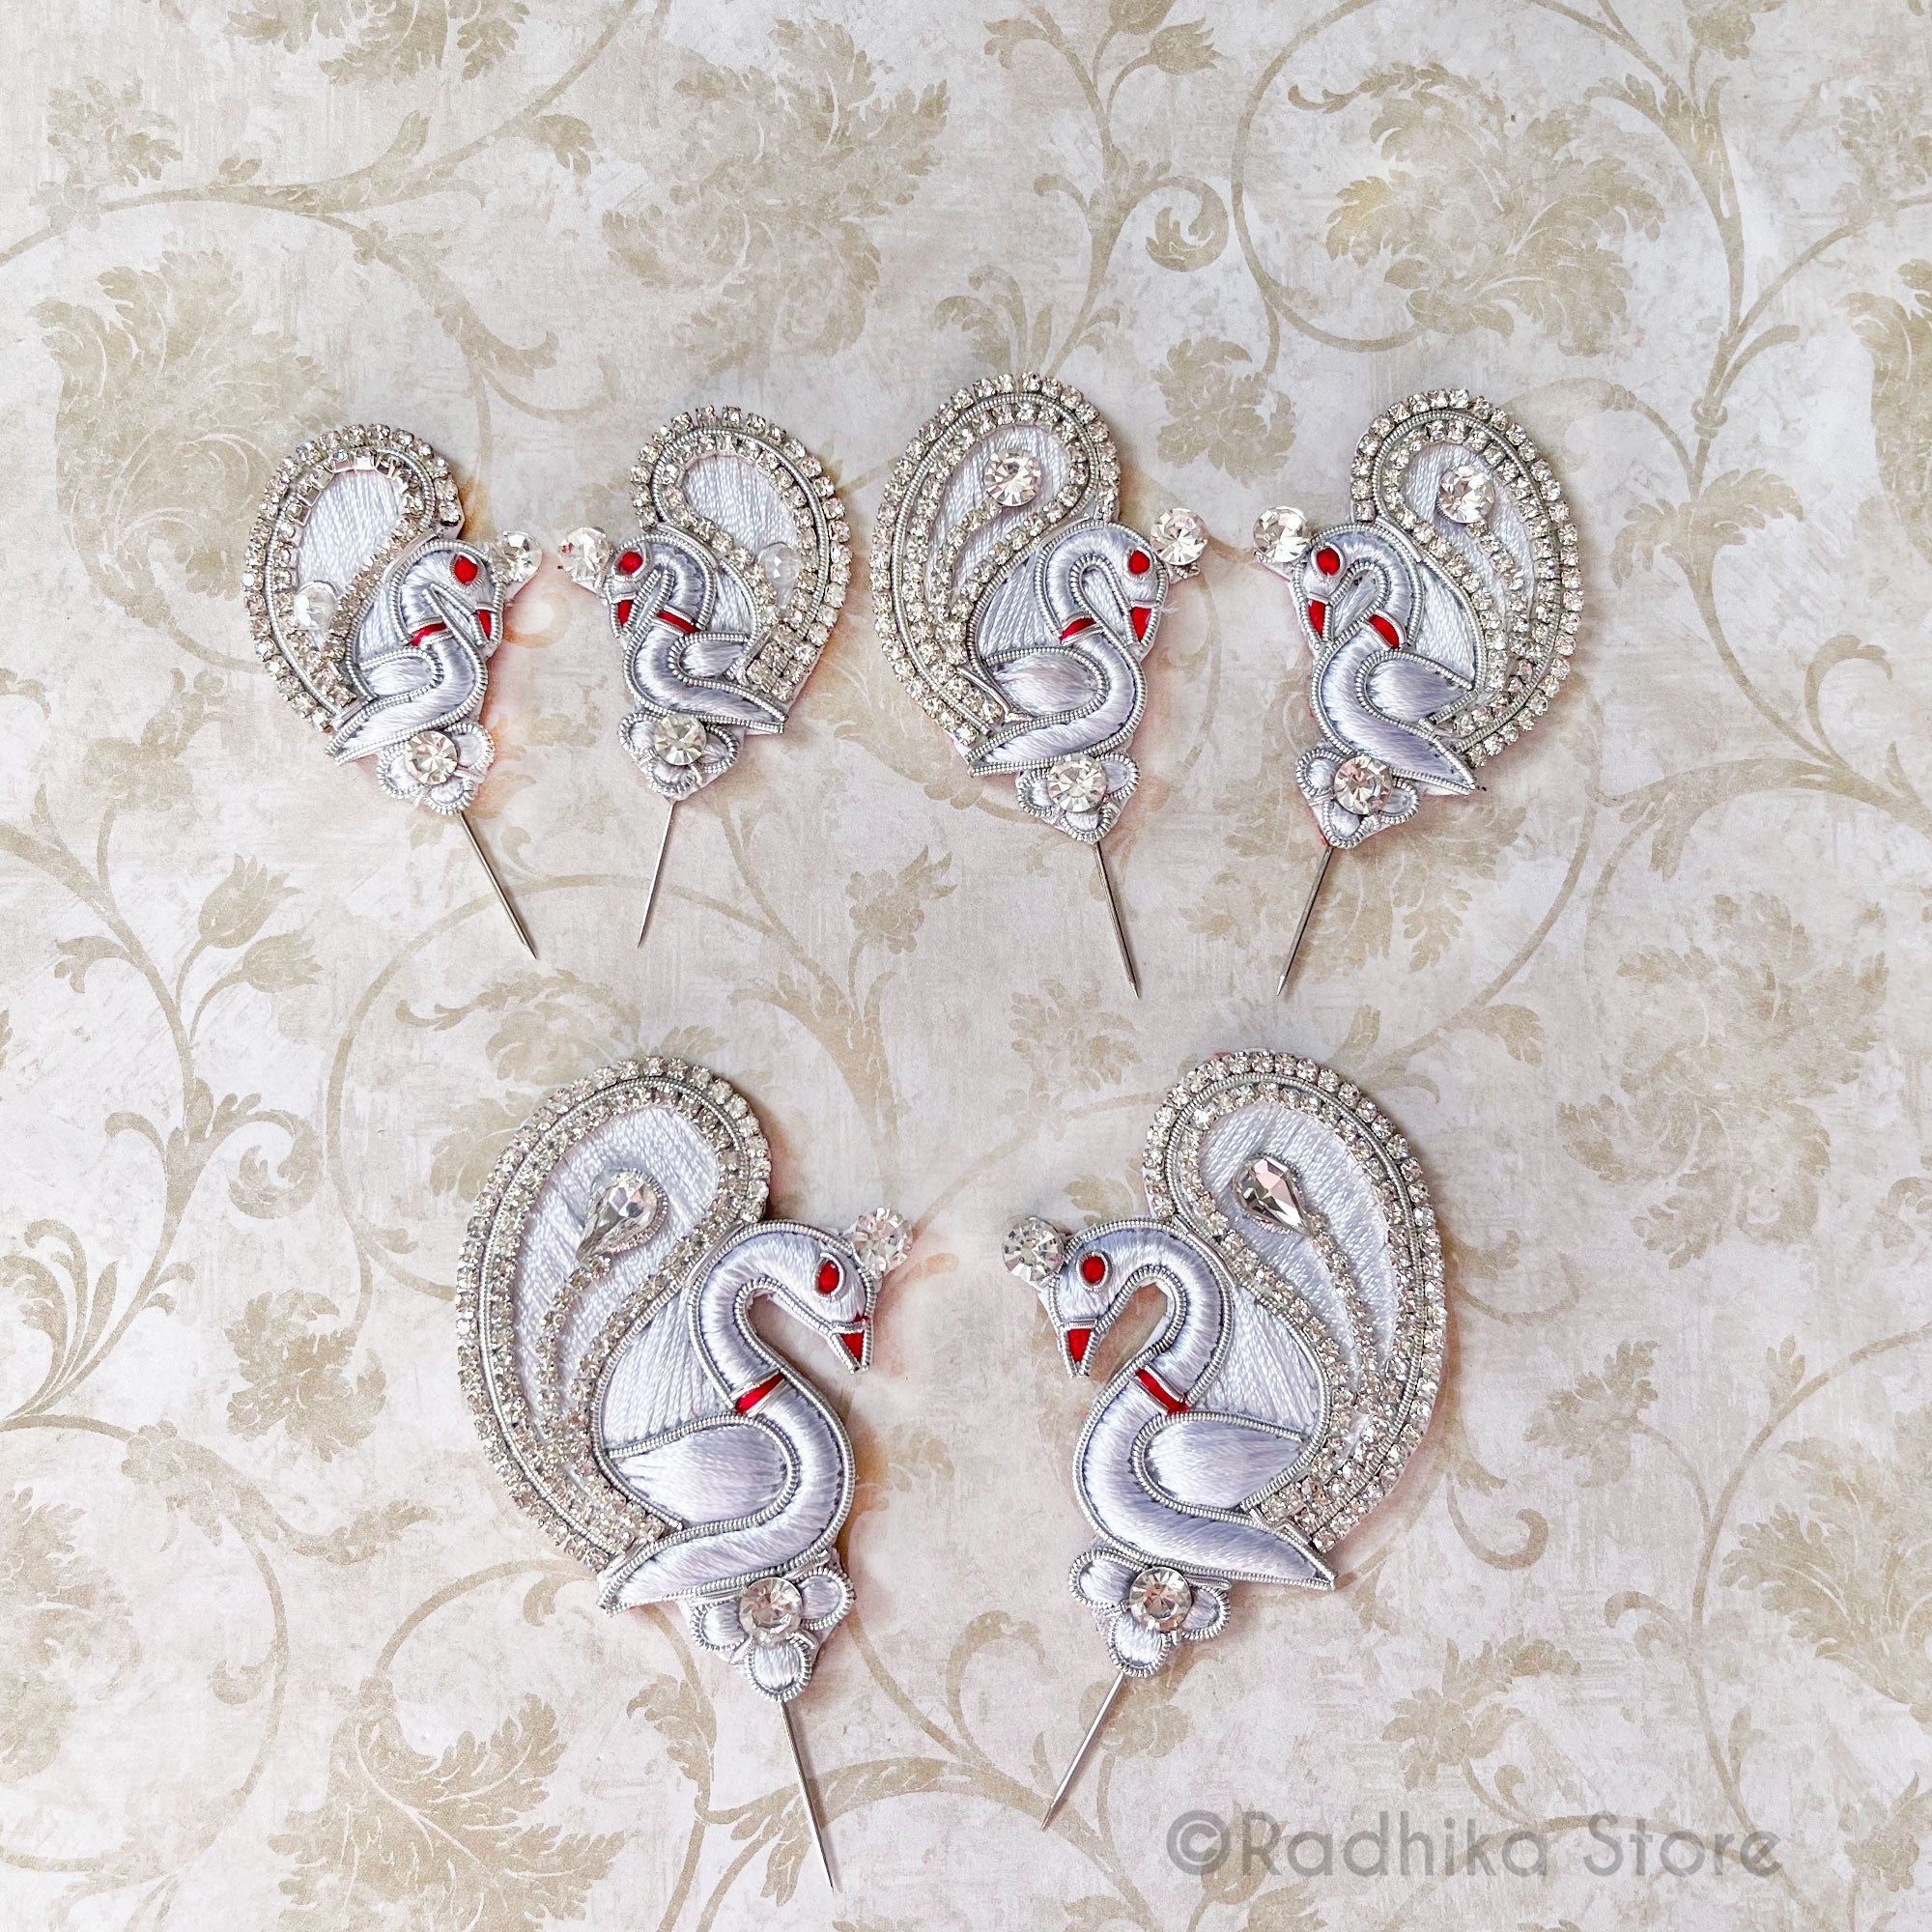 Silver Adorning Peacocks with Jeweled Head - Embroidery Turban Pins - Set of 2